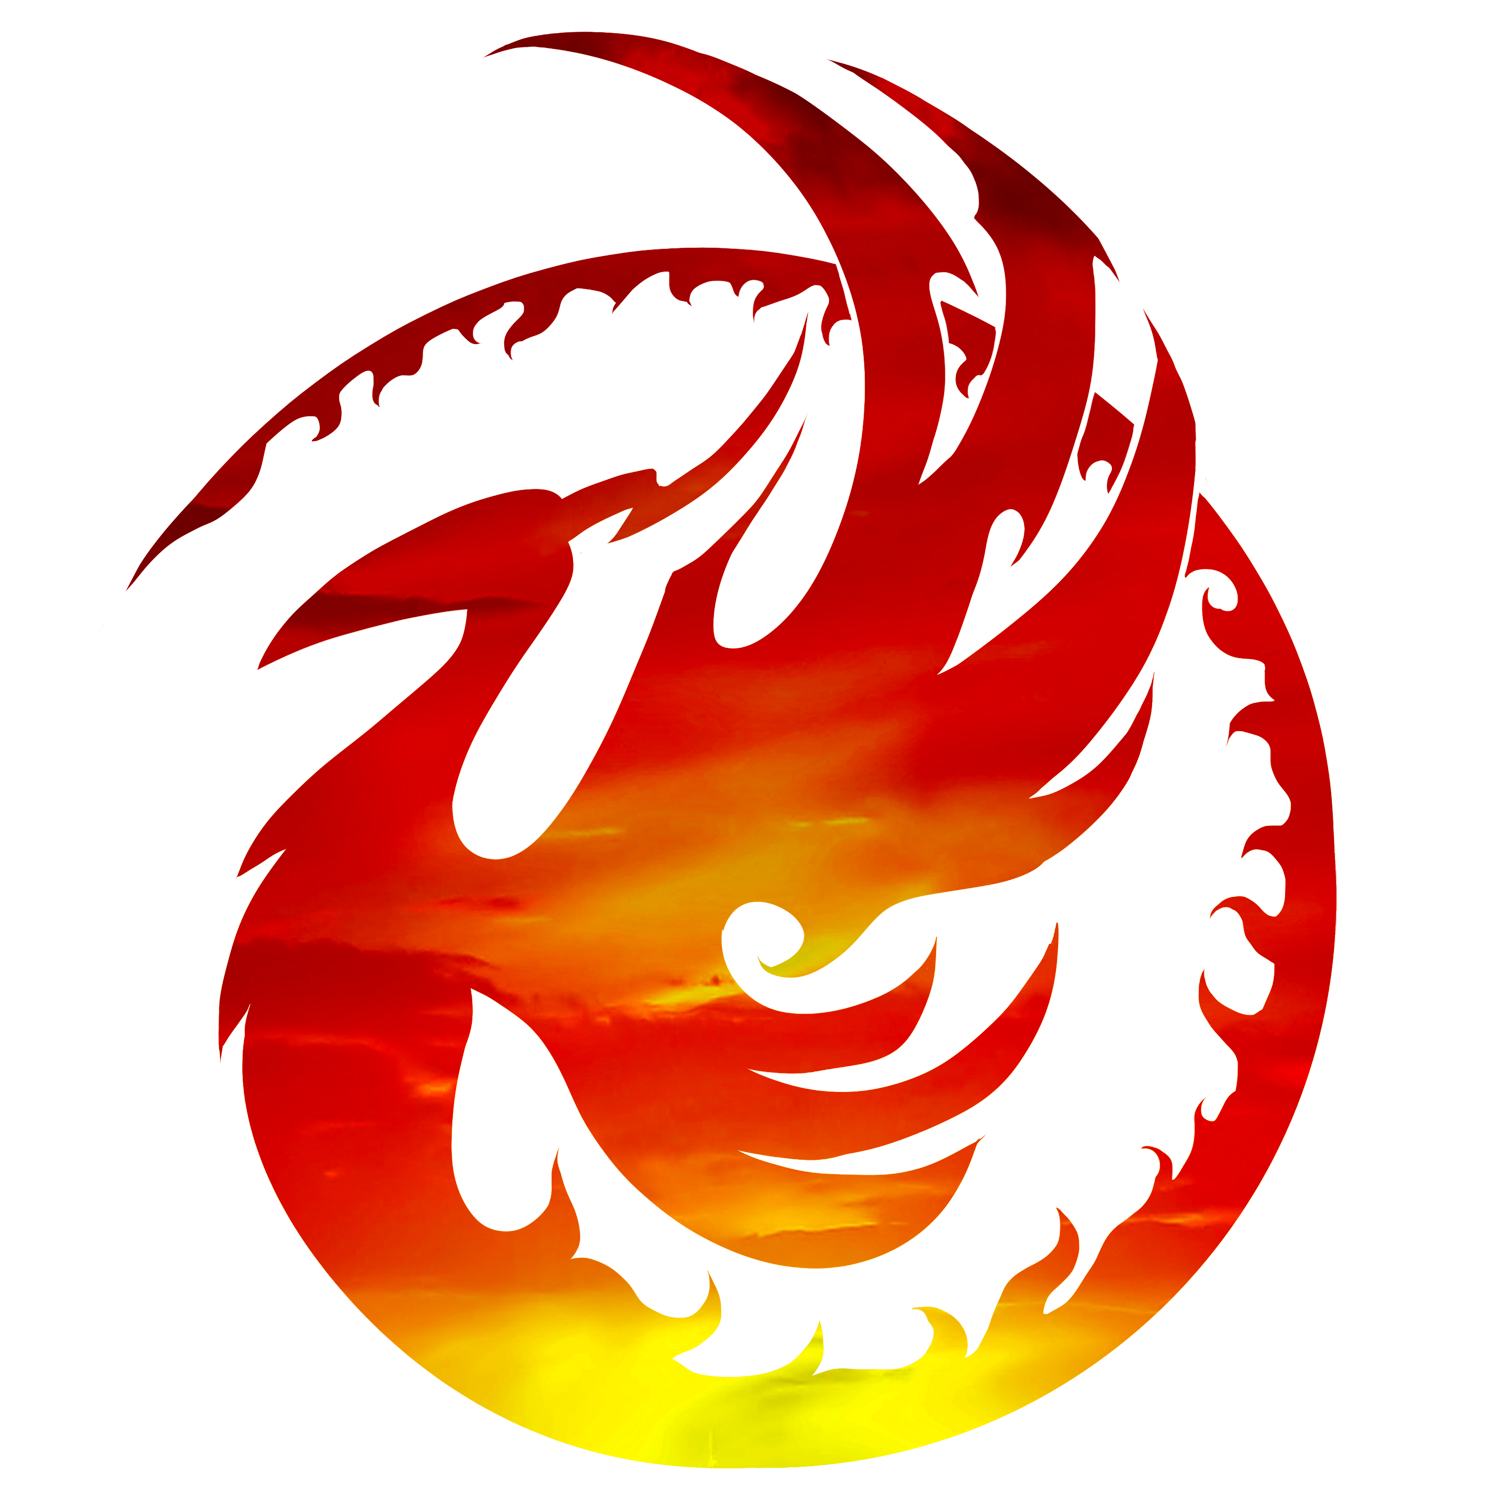 Gallery images and information: Red Phoenix Logo